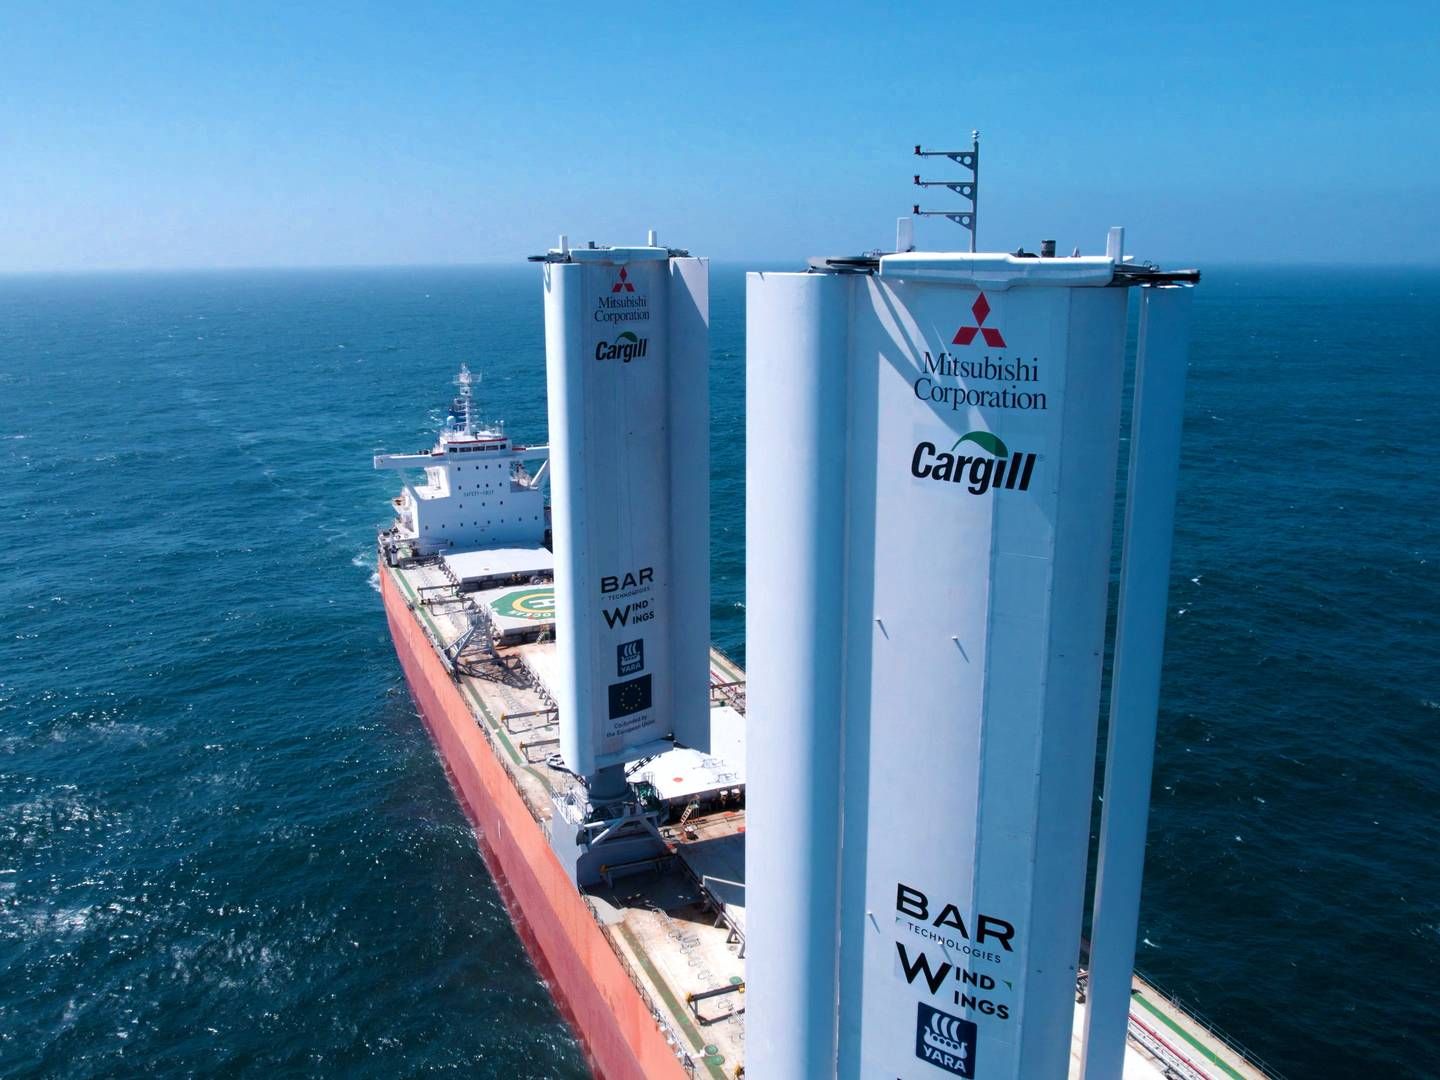 In August, Cargill International tested a new wind-powered ship. Now, in a joint development project with Lloyds Register and others, the commodities company is launching a new kamsarmax dry cargo ship that can run on methanol and wind power. | Photo: Cargill Bulgaria/Reuters/Ritzau Scanpix